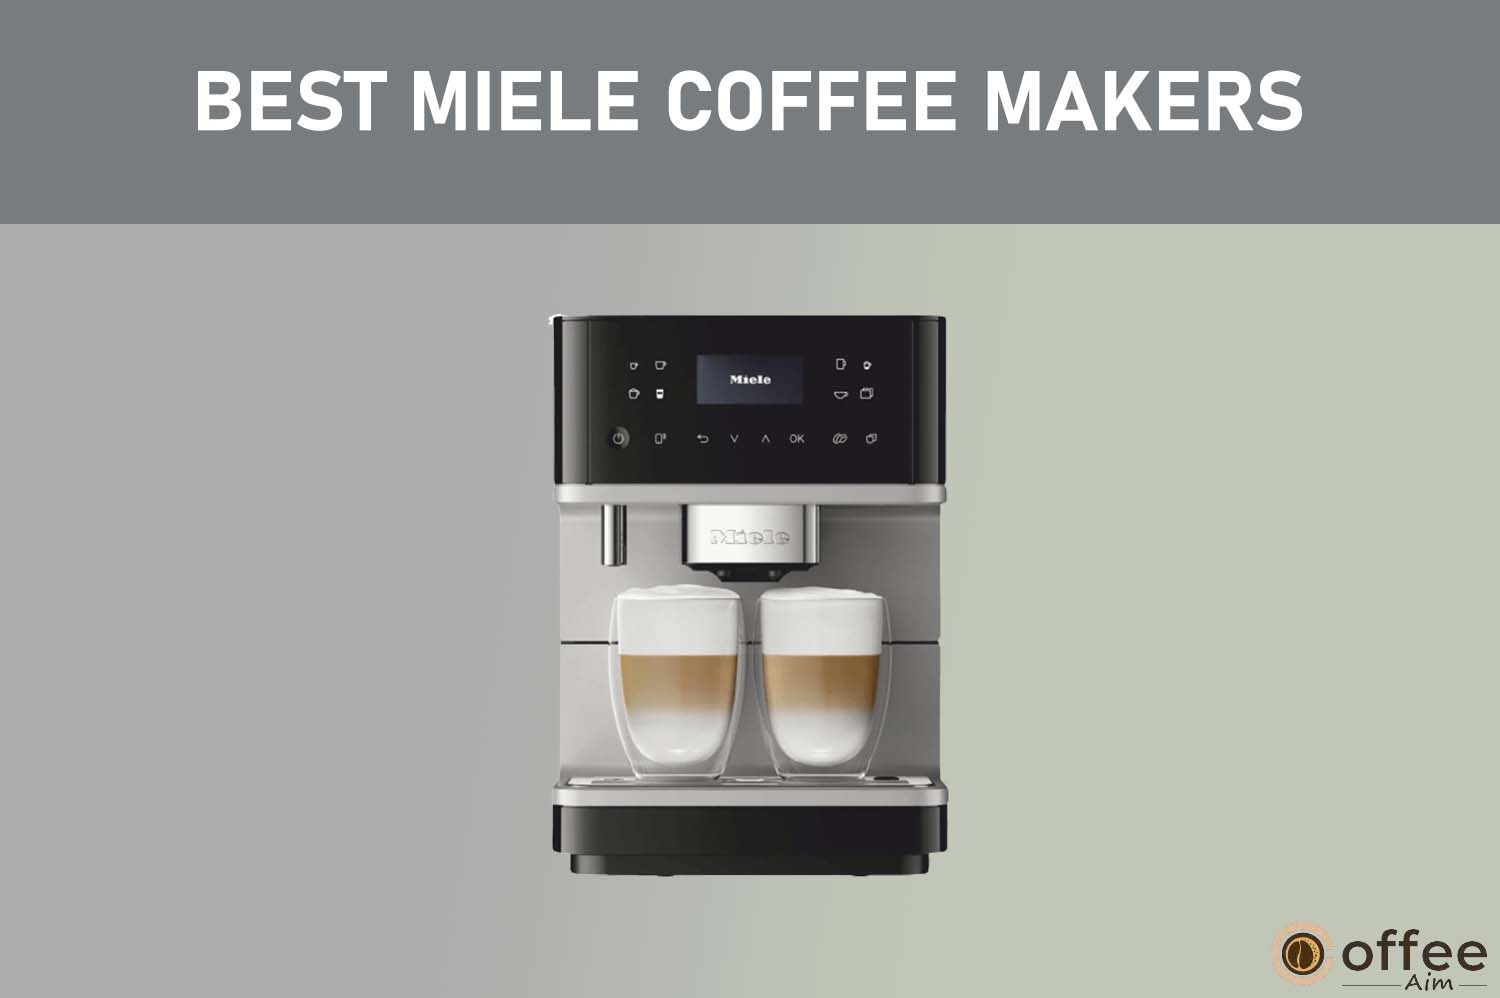 Featured image for the article "Best Miele Coffee Makers"